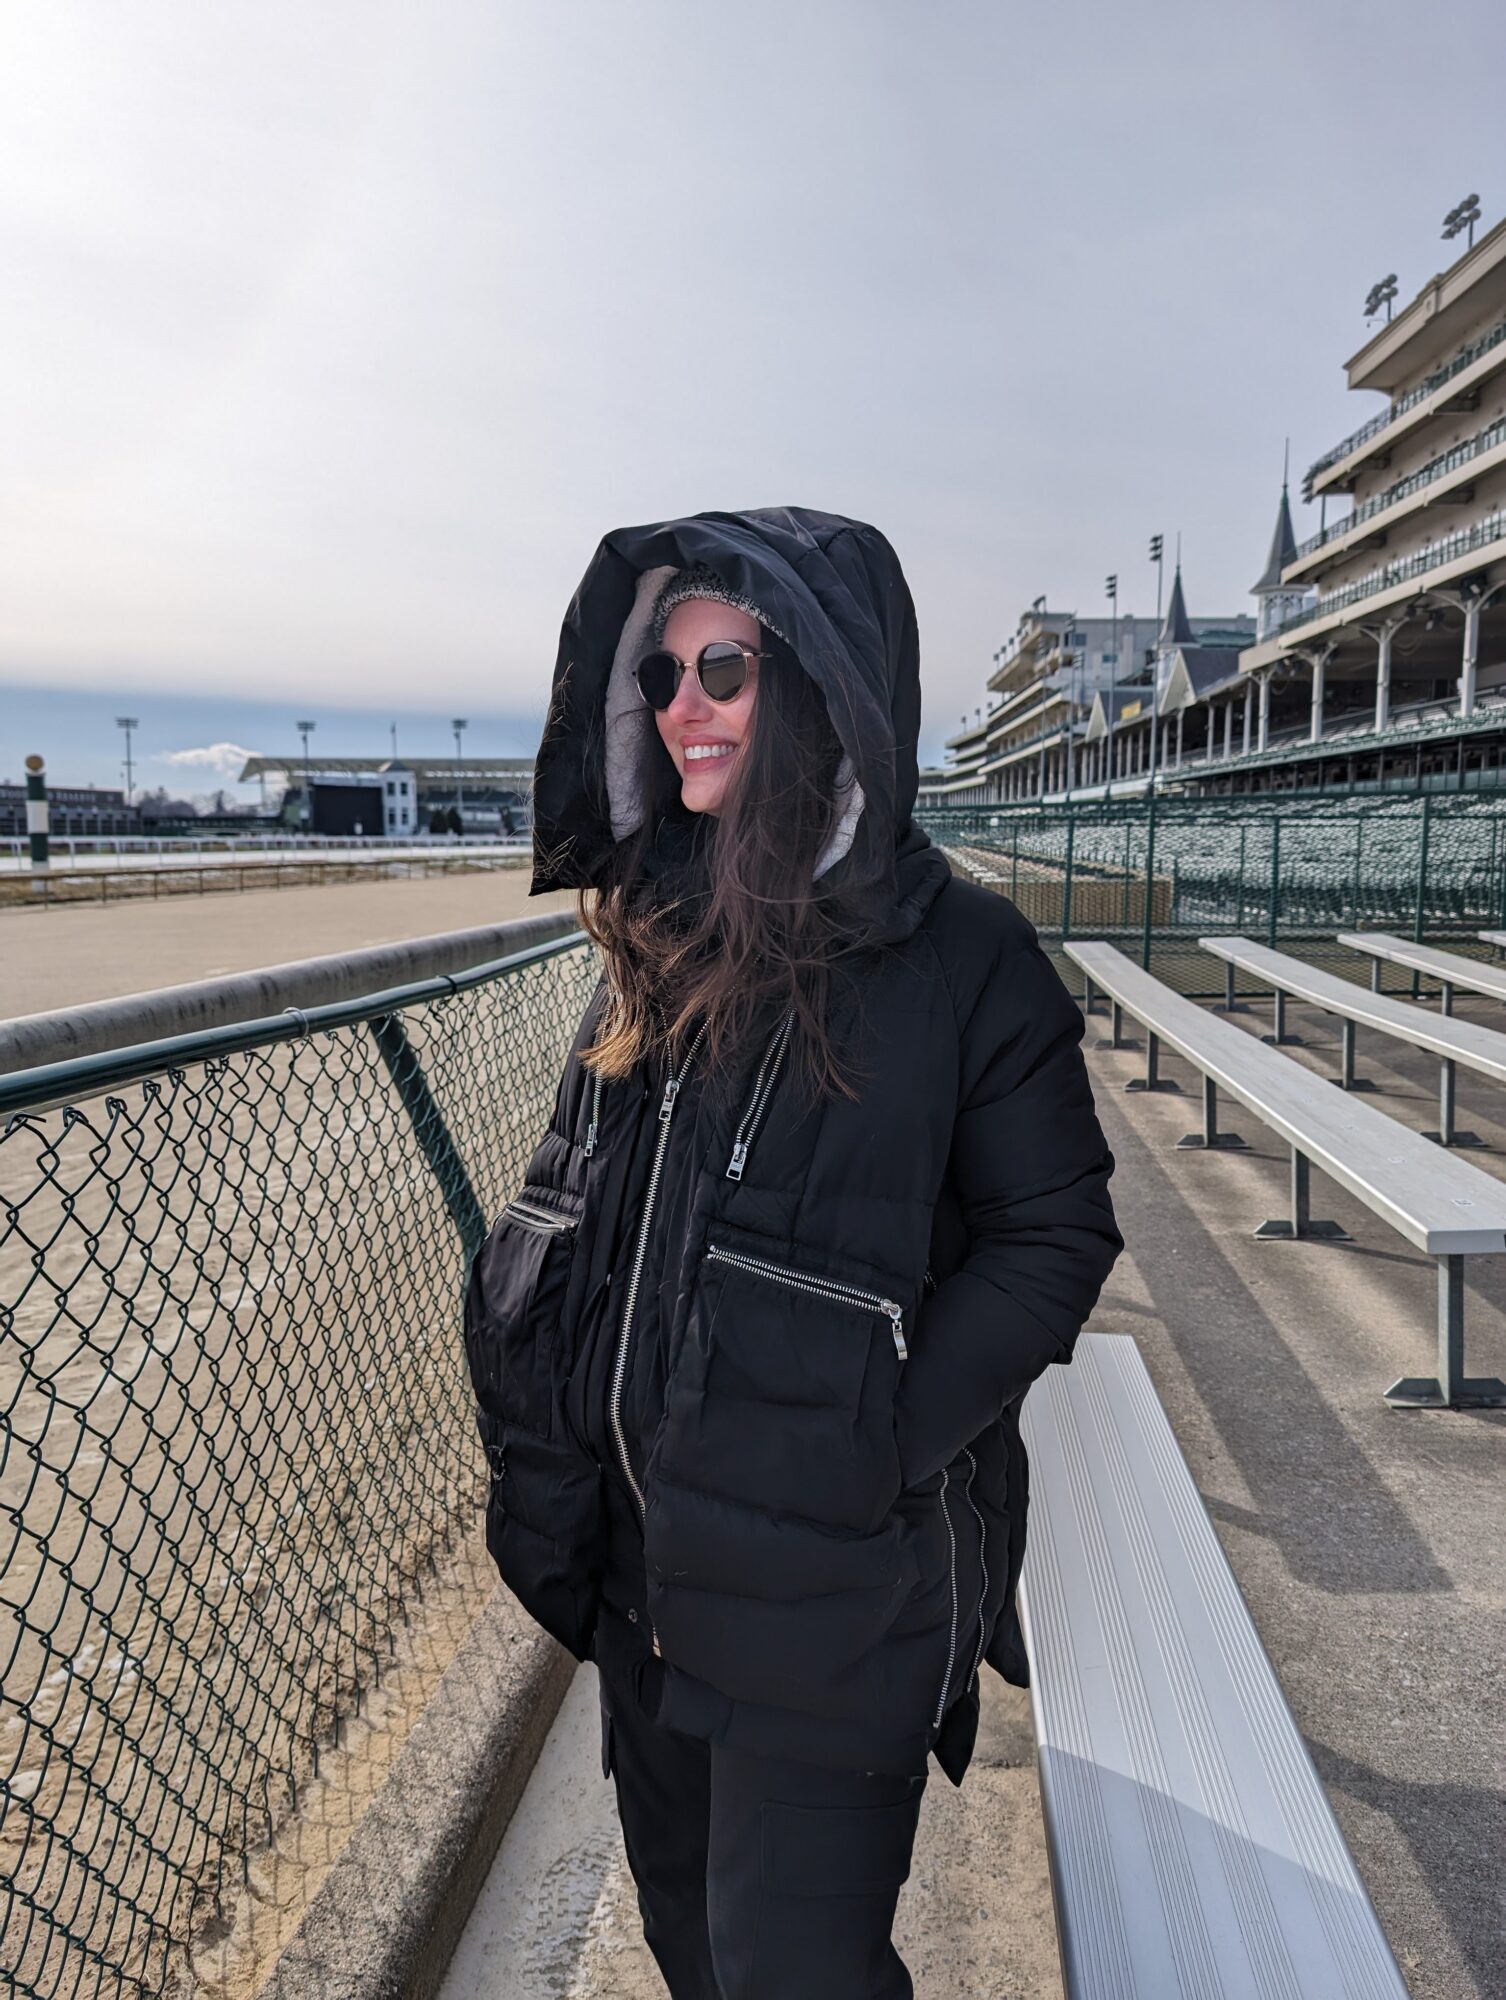 Alyssa is bundled up on the Kentucky Derby track